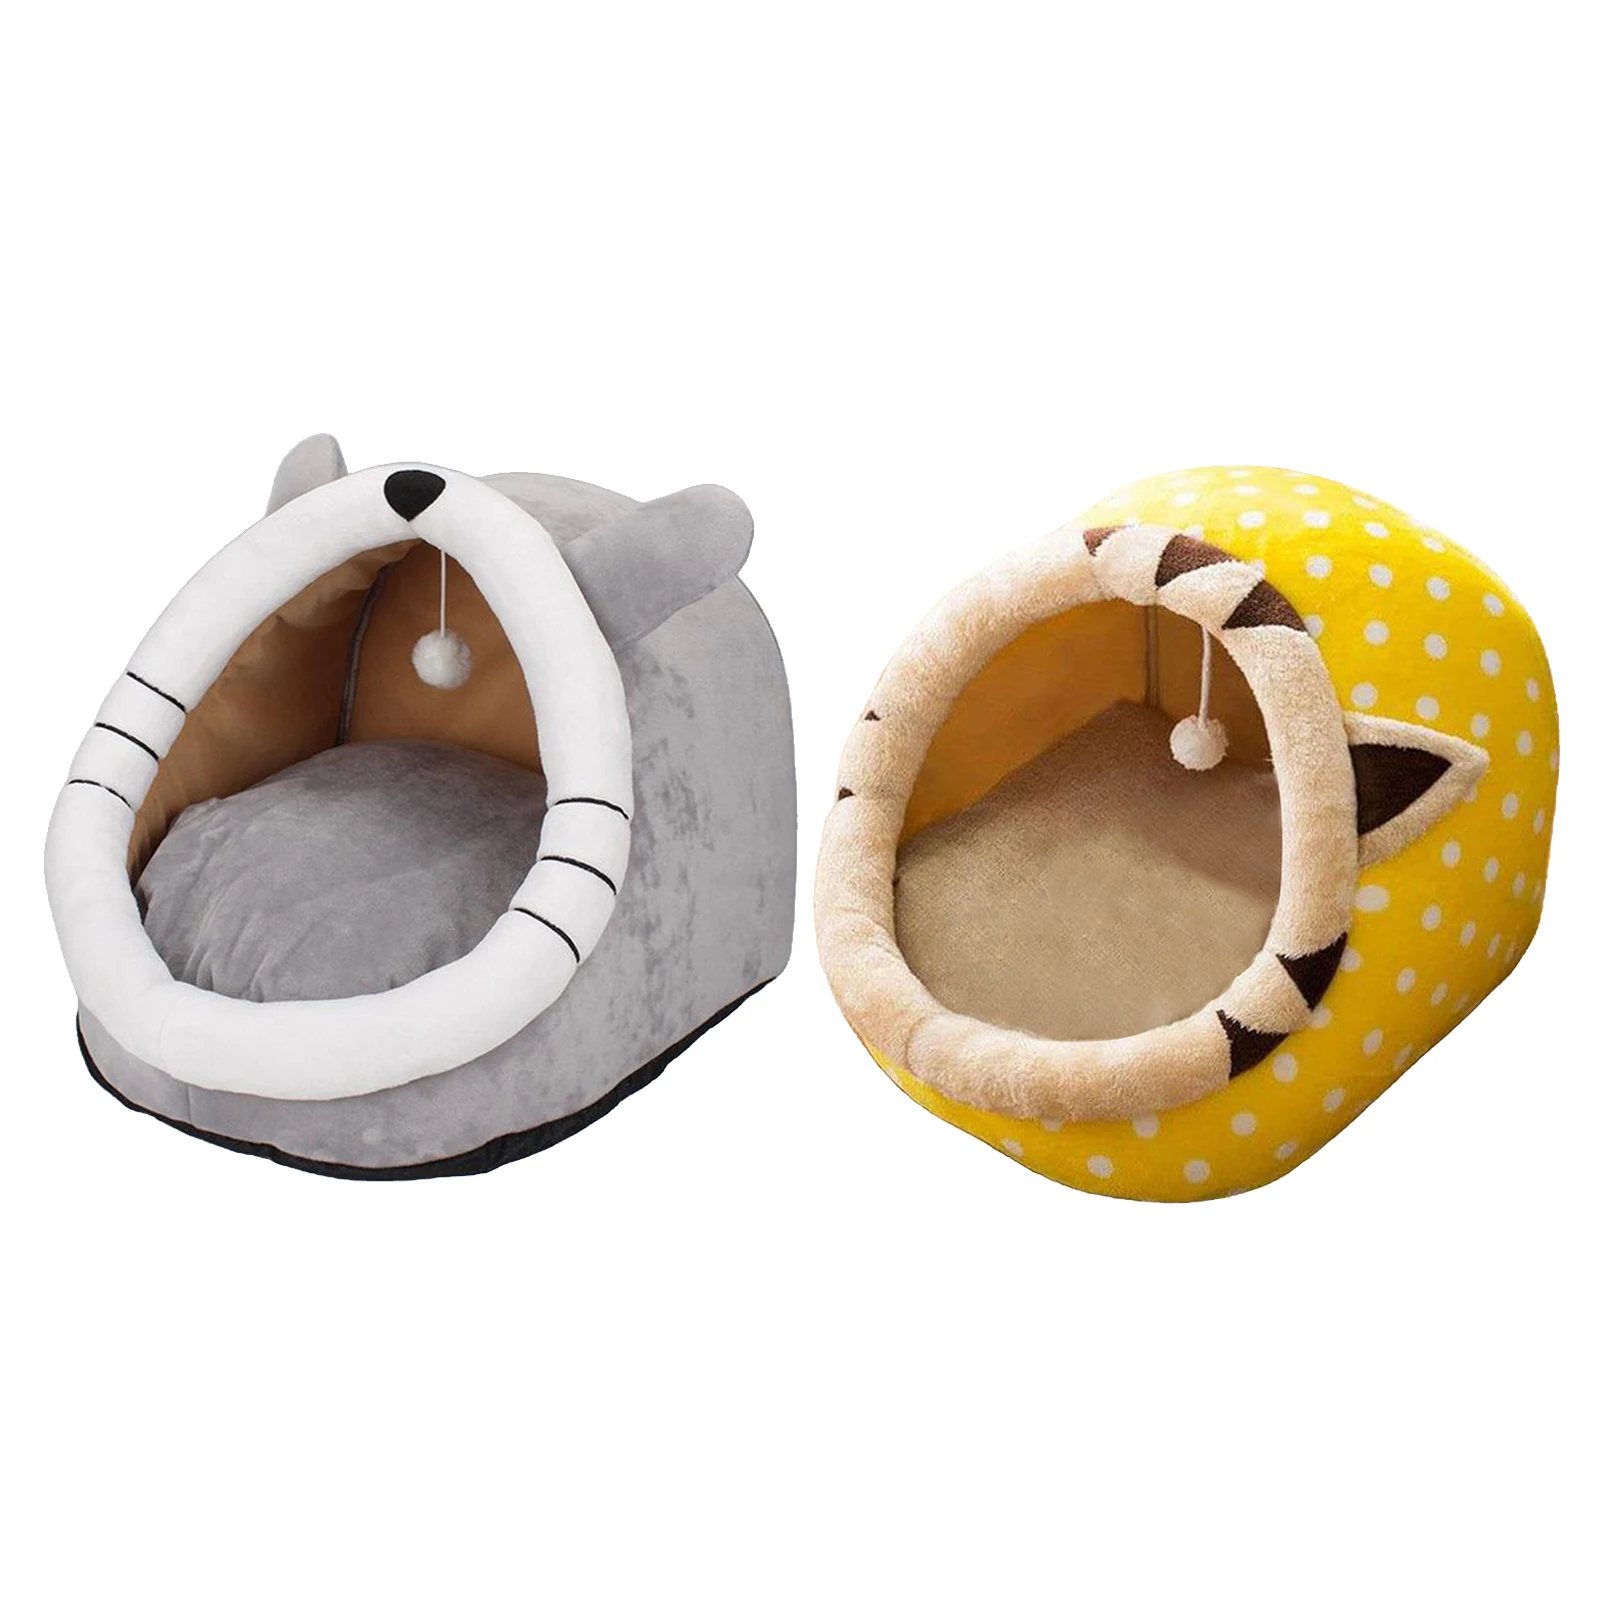 Soft Dog Bed Adorable Pet Winter Sleeping Nest for Small Animals Cat Puppy Kitten